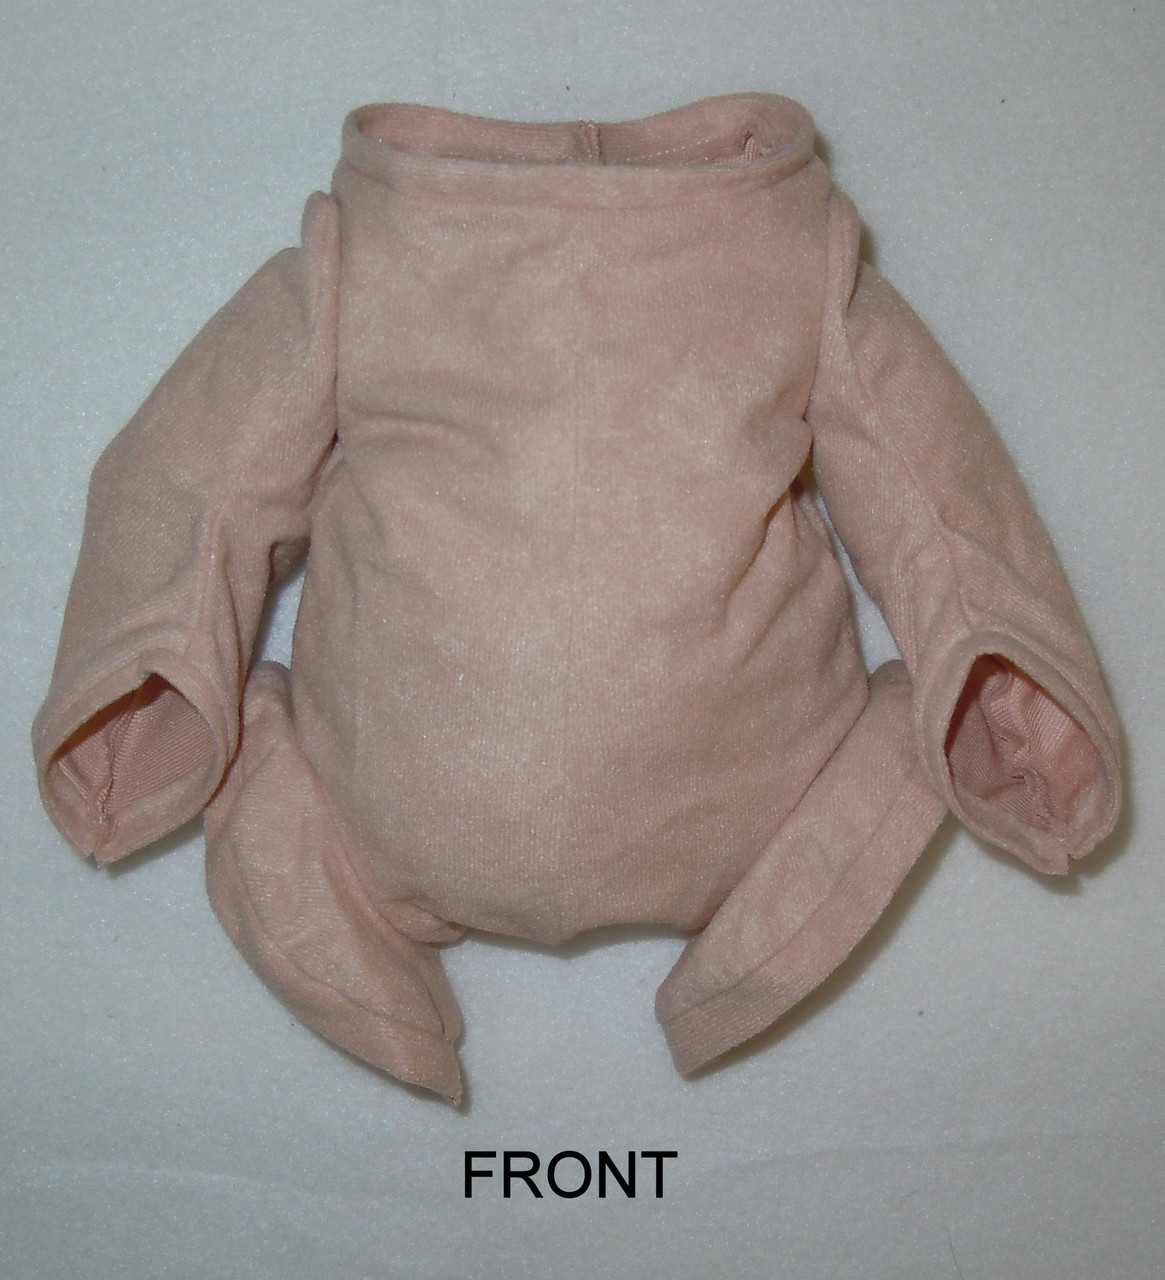 Doe Suede Reborn Doll Body~3/4 Arm Full Side Legs~Choose Size And Colour #5